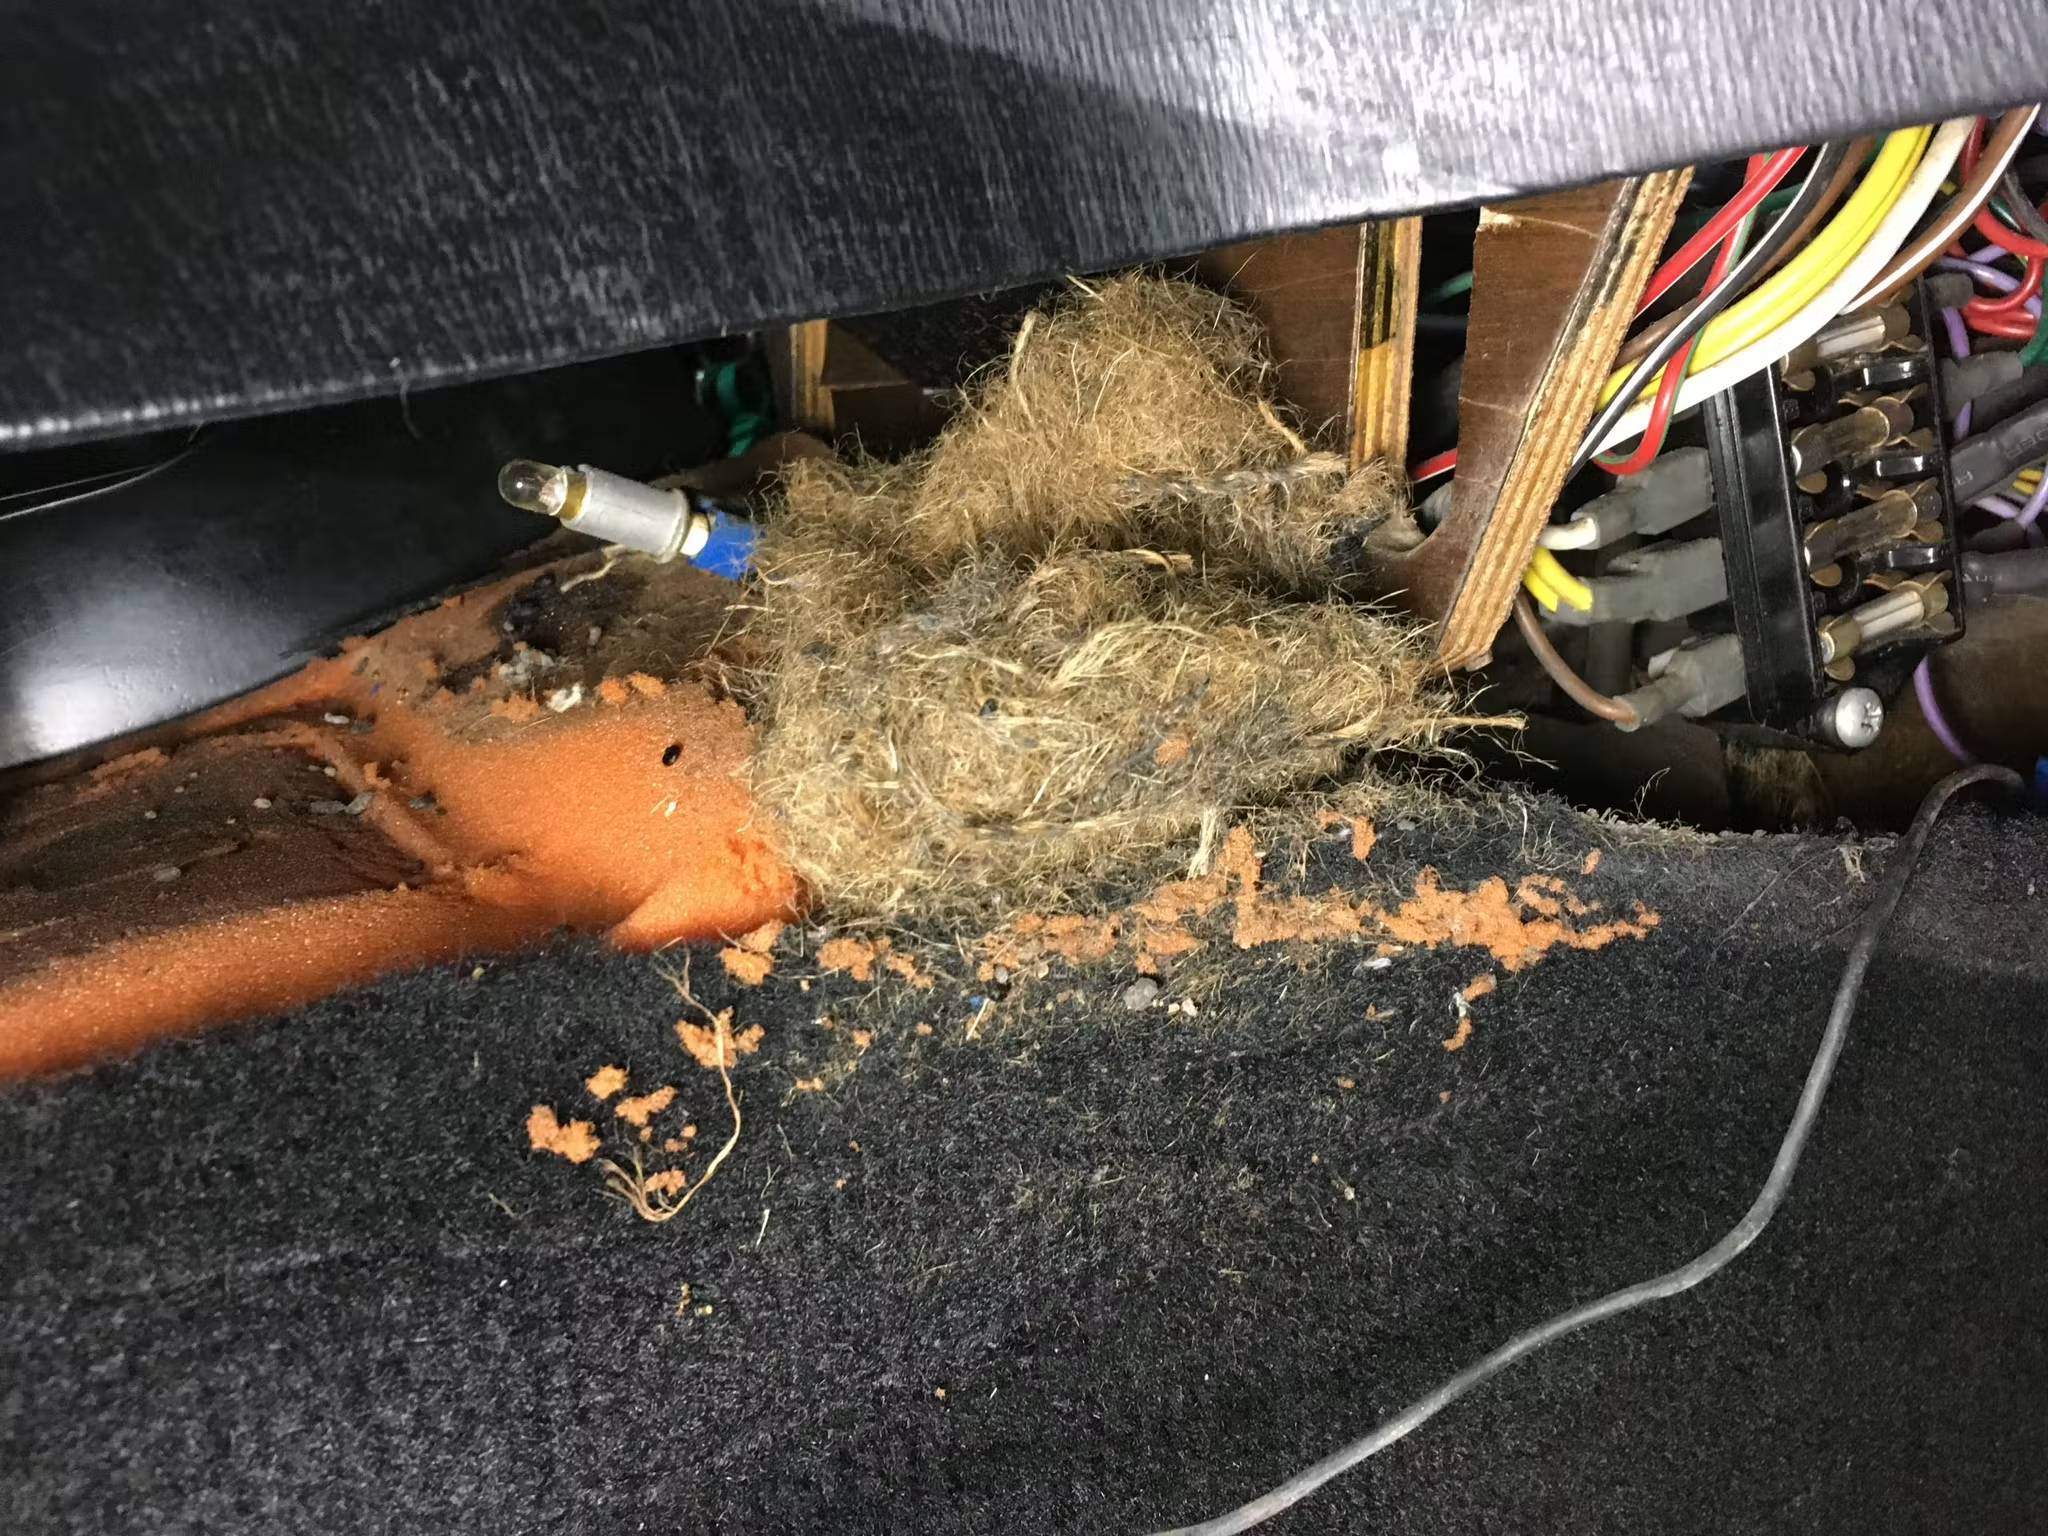 Mouse nest in a car